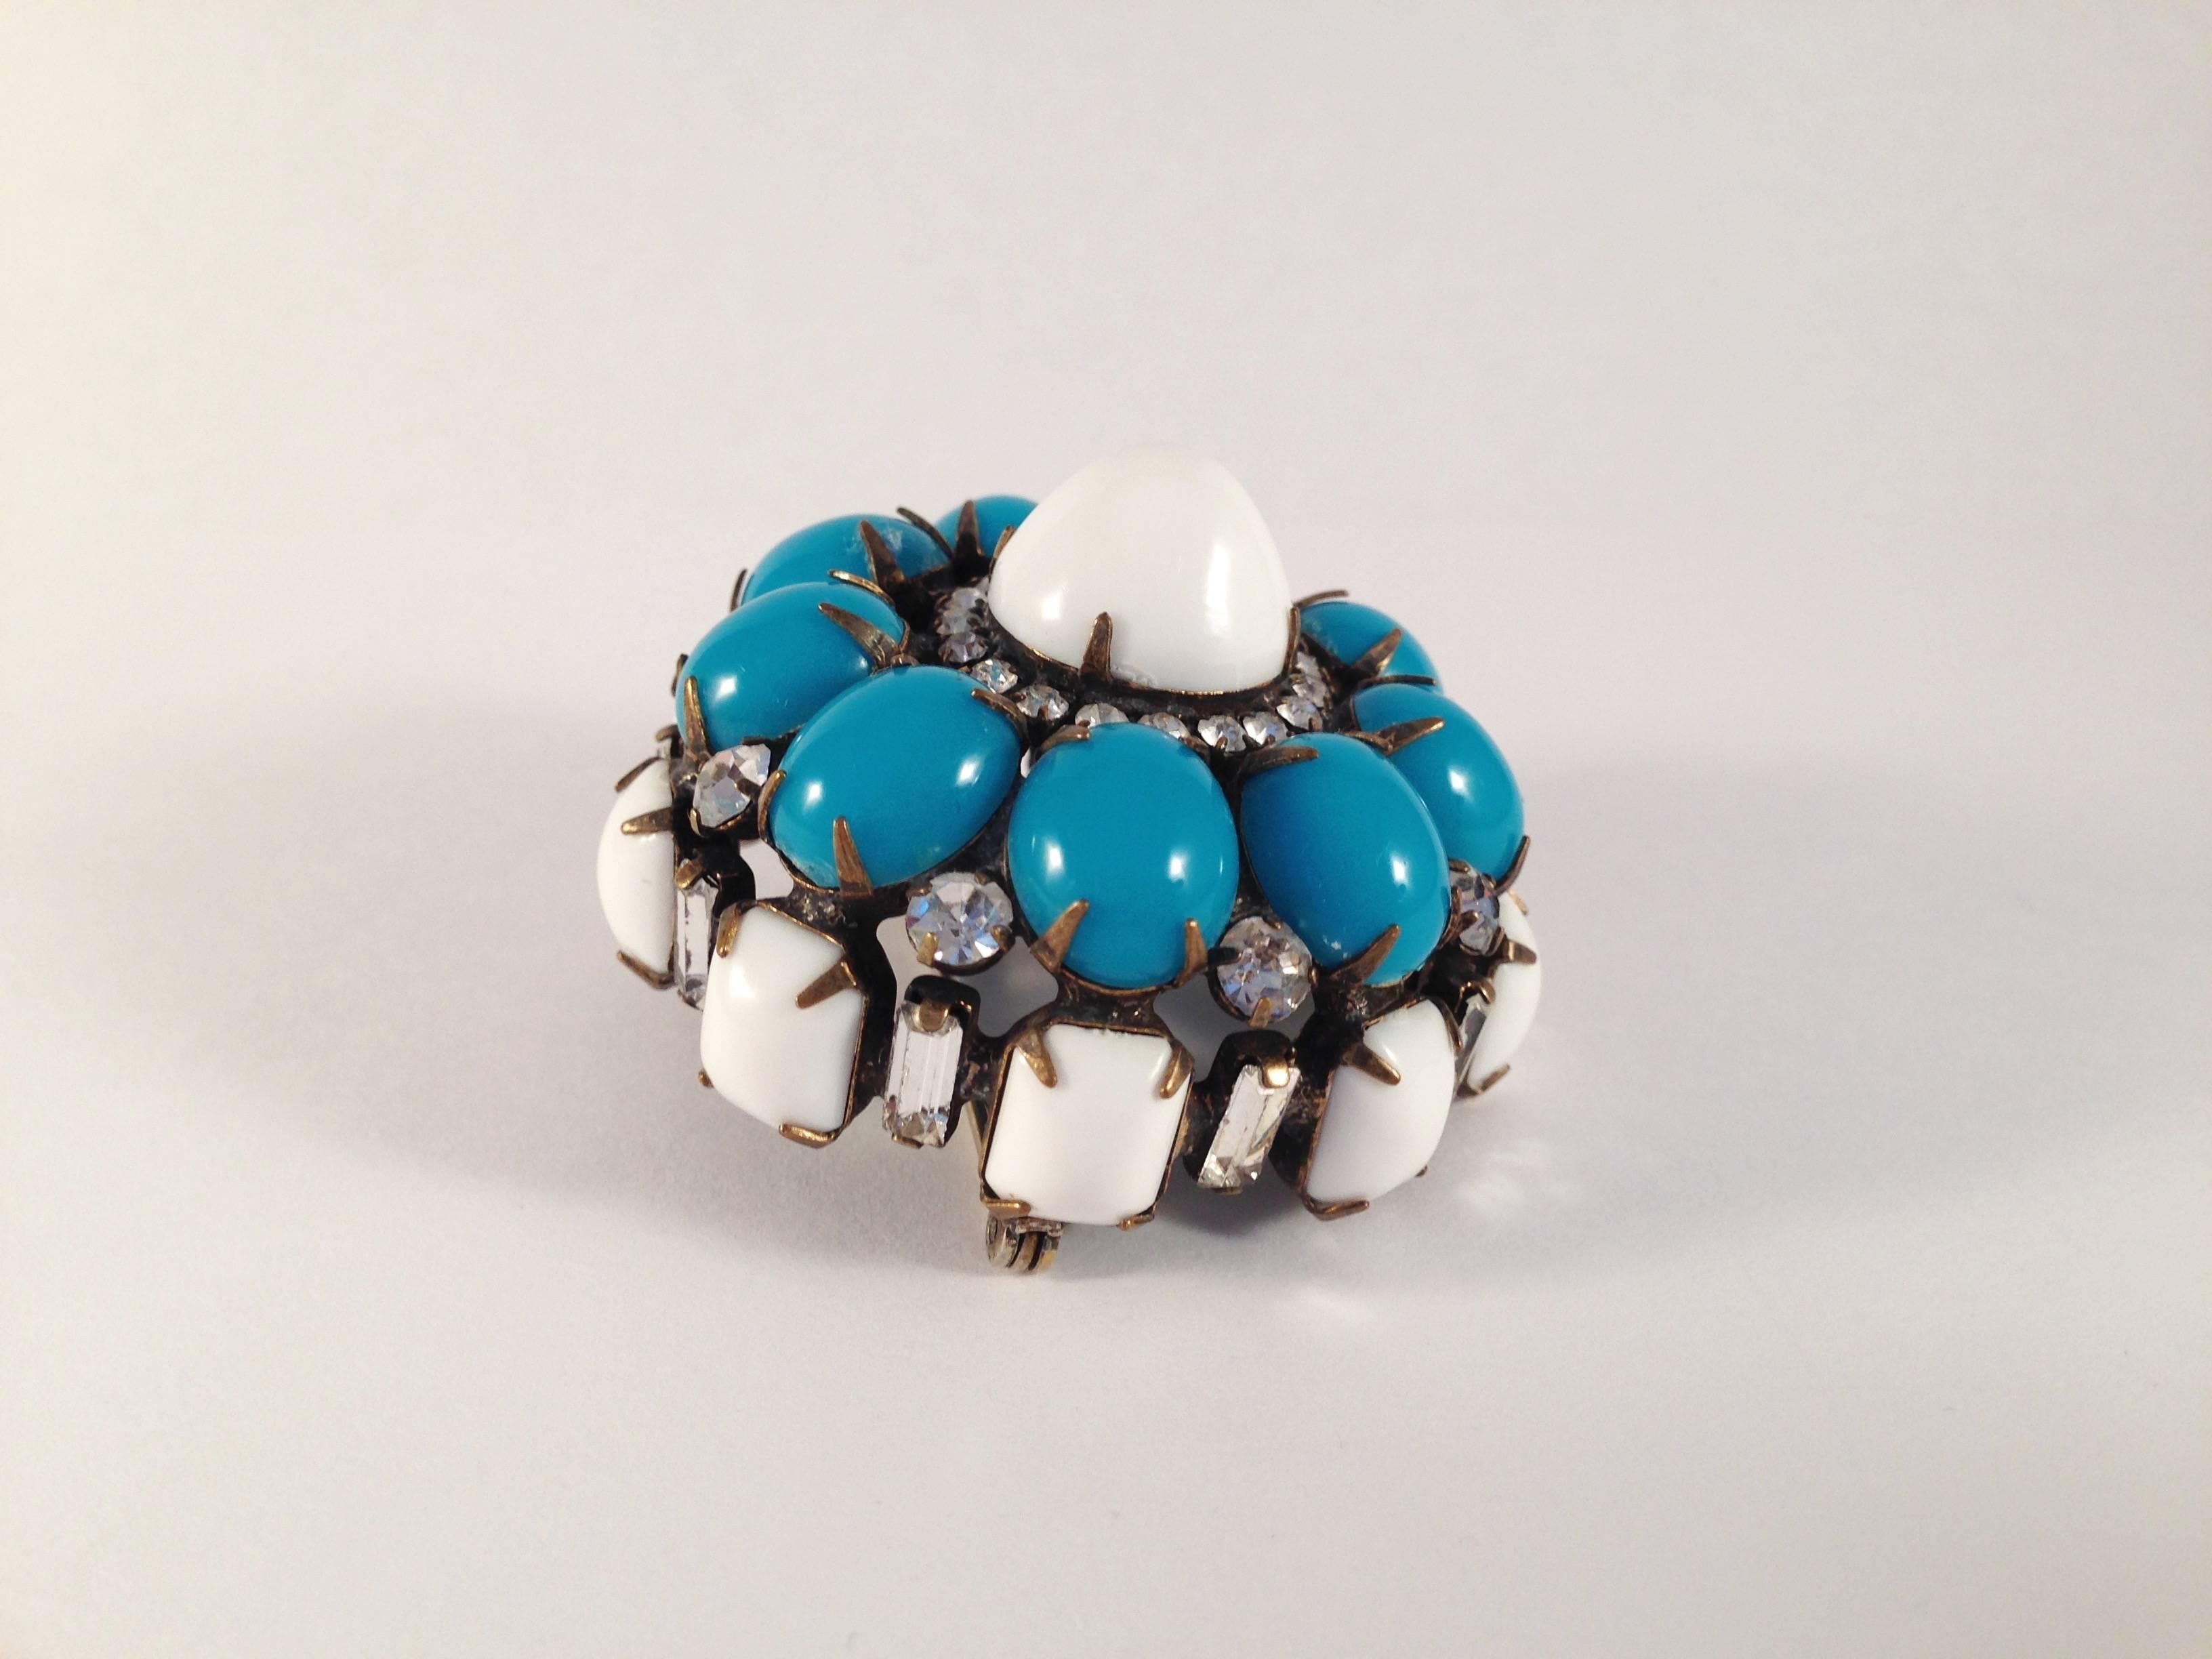 This is a fabulous 3-dimensional 1960s Kenneth Jay Lane brooch. It is made out of blue and white glass and resin stones and clear rhinestones. It measure 1 7/8